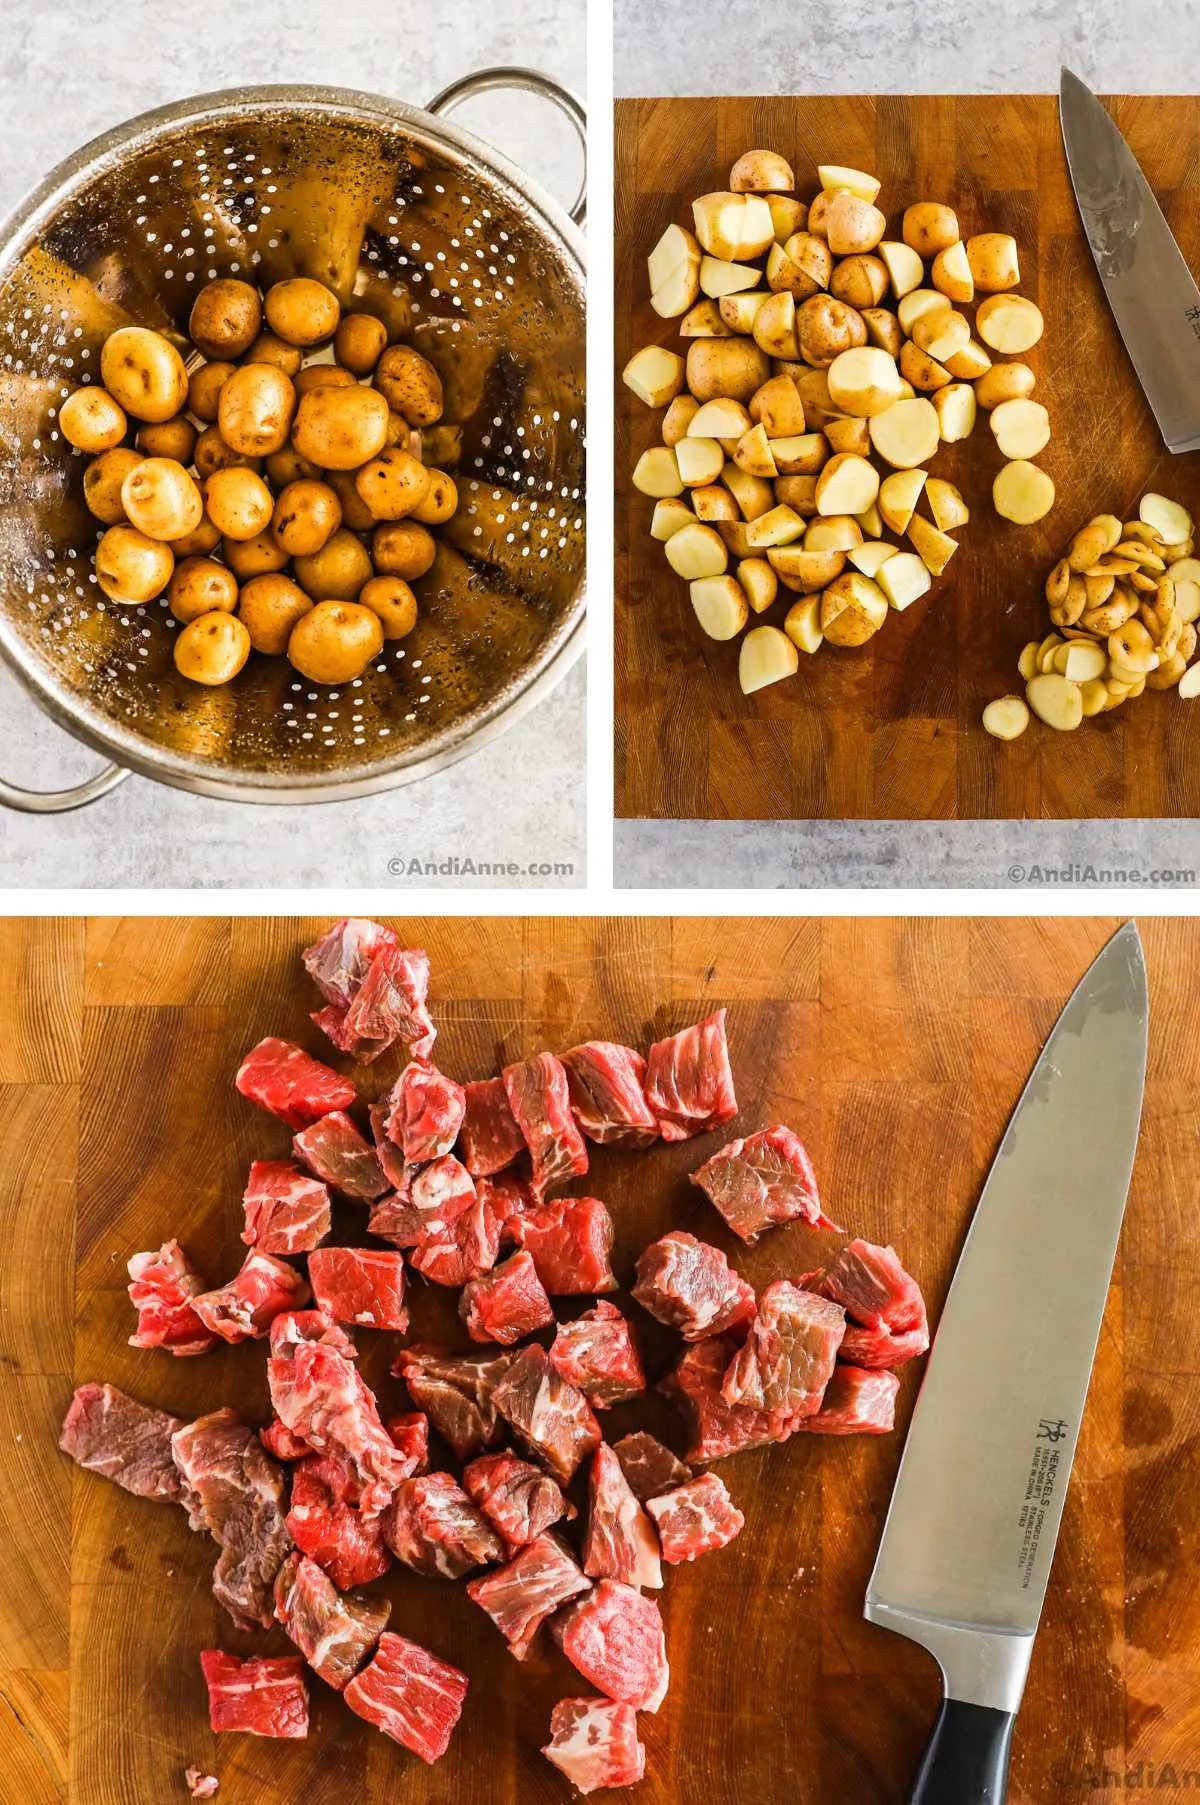 Three overhead images in one: 1. Washed mini potatoes in metal strainer. 2. Potatoes on cutting board shopped. 3. Steak on cutting board chopped into cubes with chef knife on the side. 